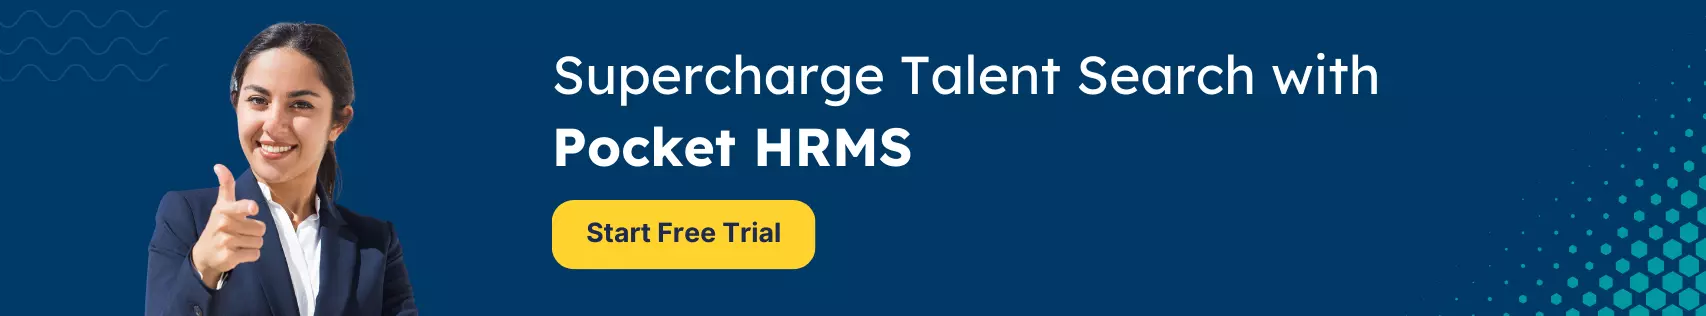 Supercharge Talent Search with Pocket HRMS